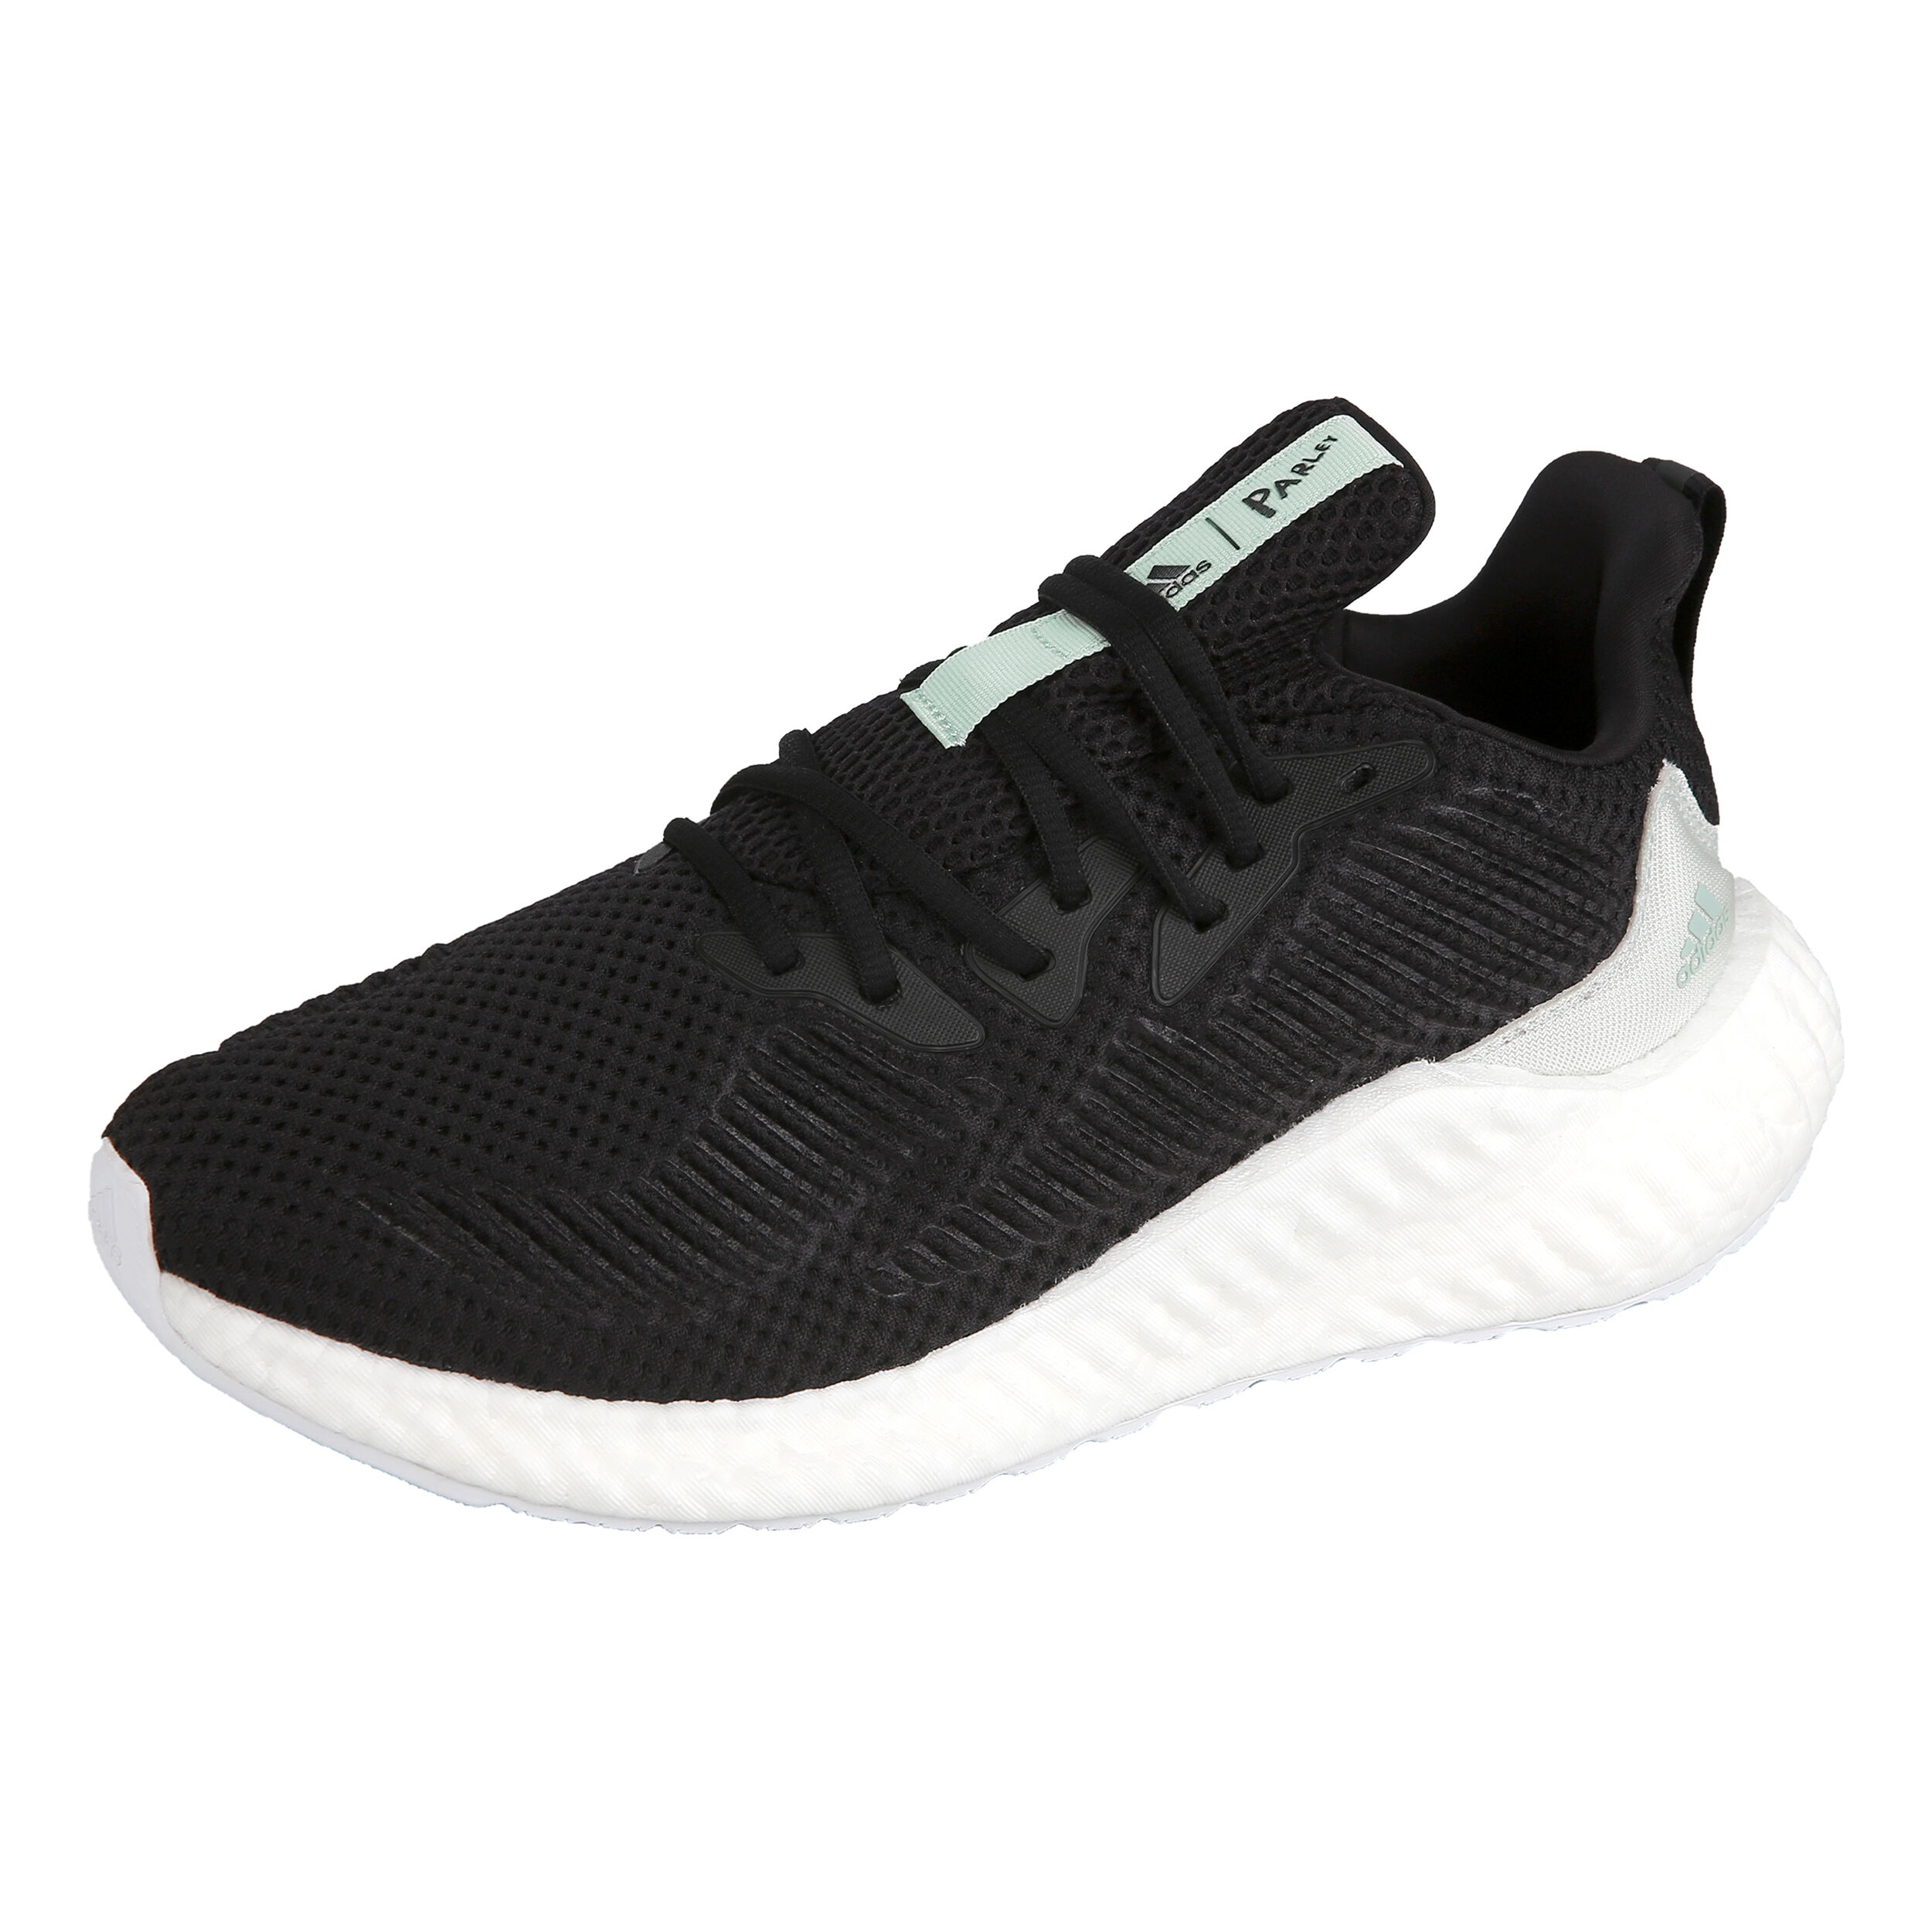 alphaboost parley